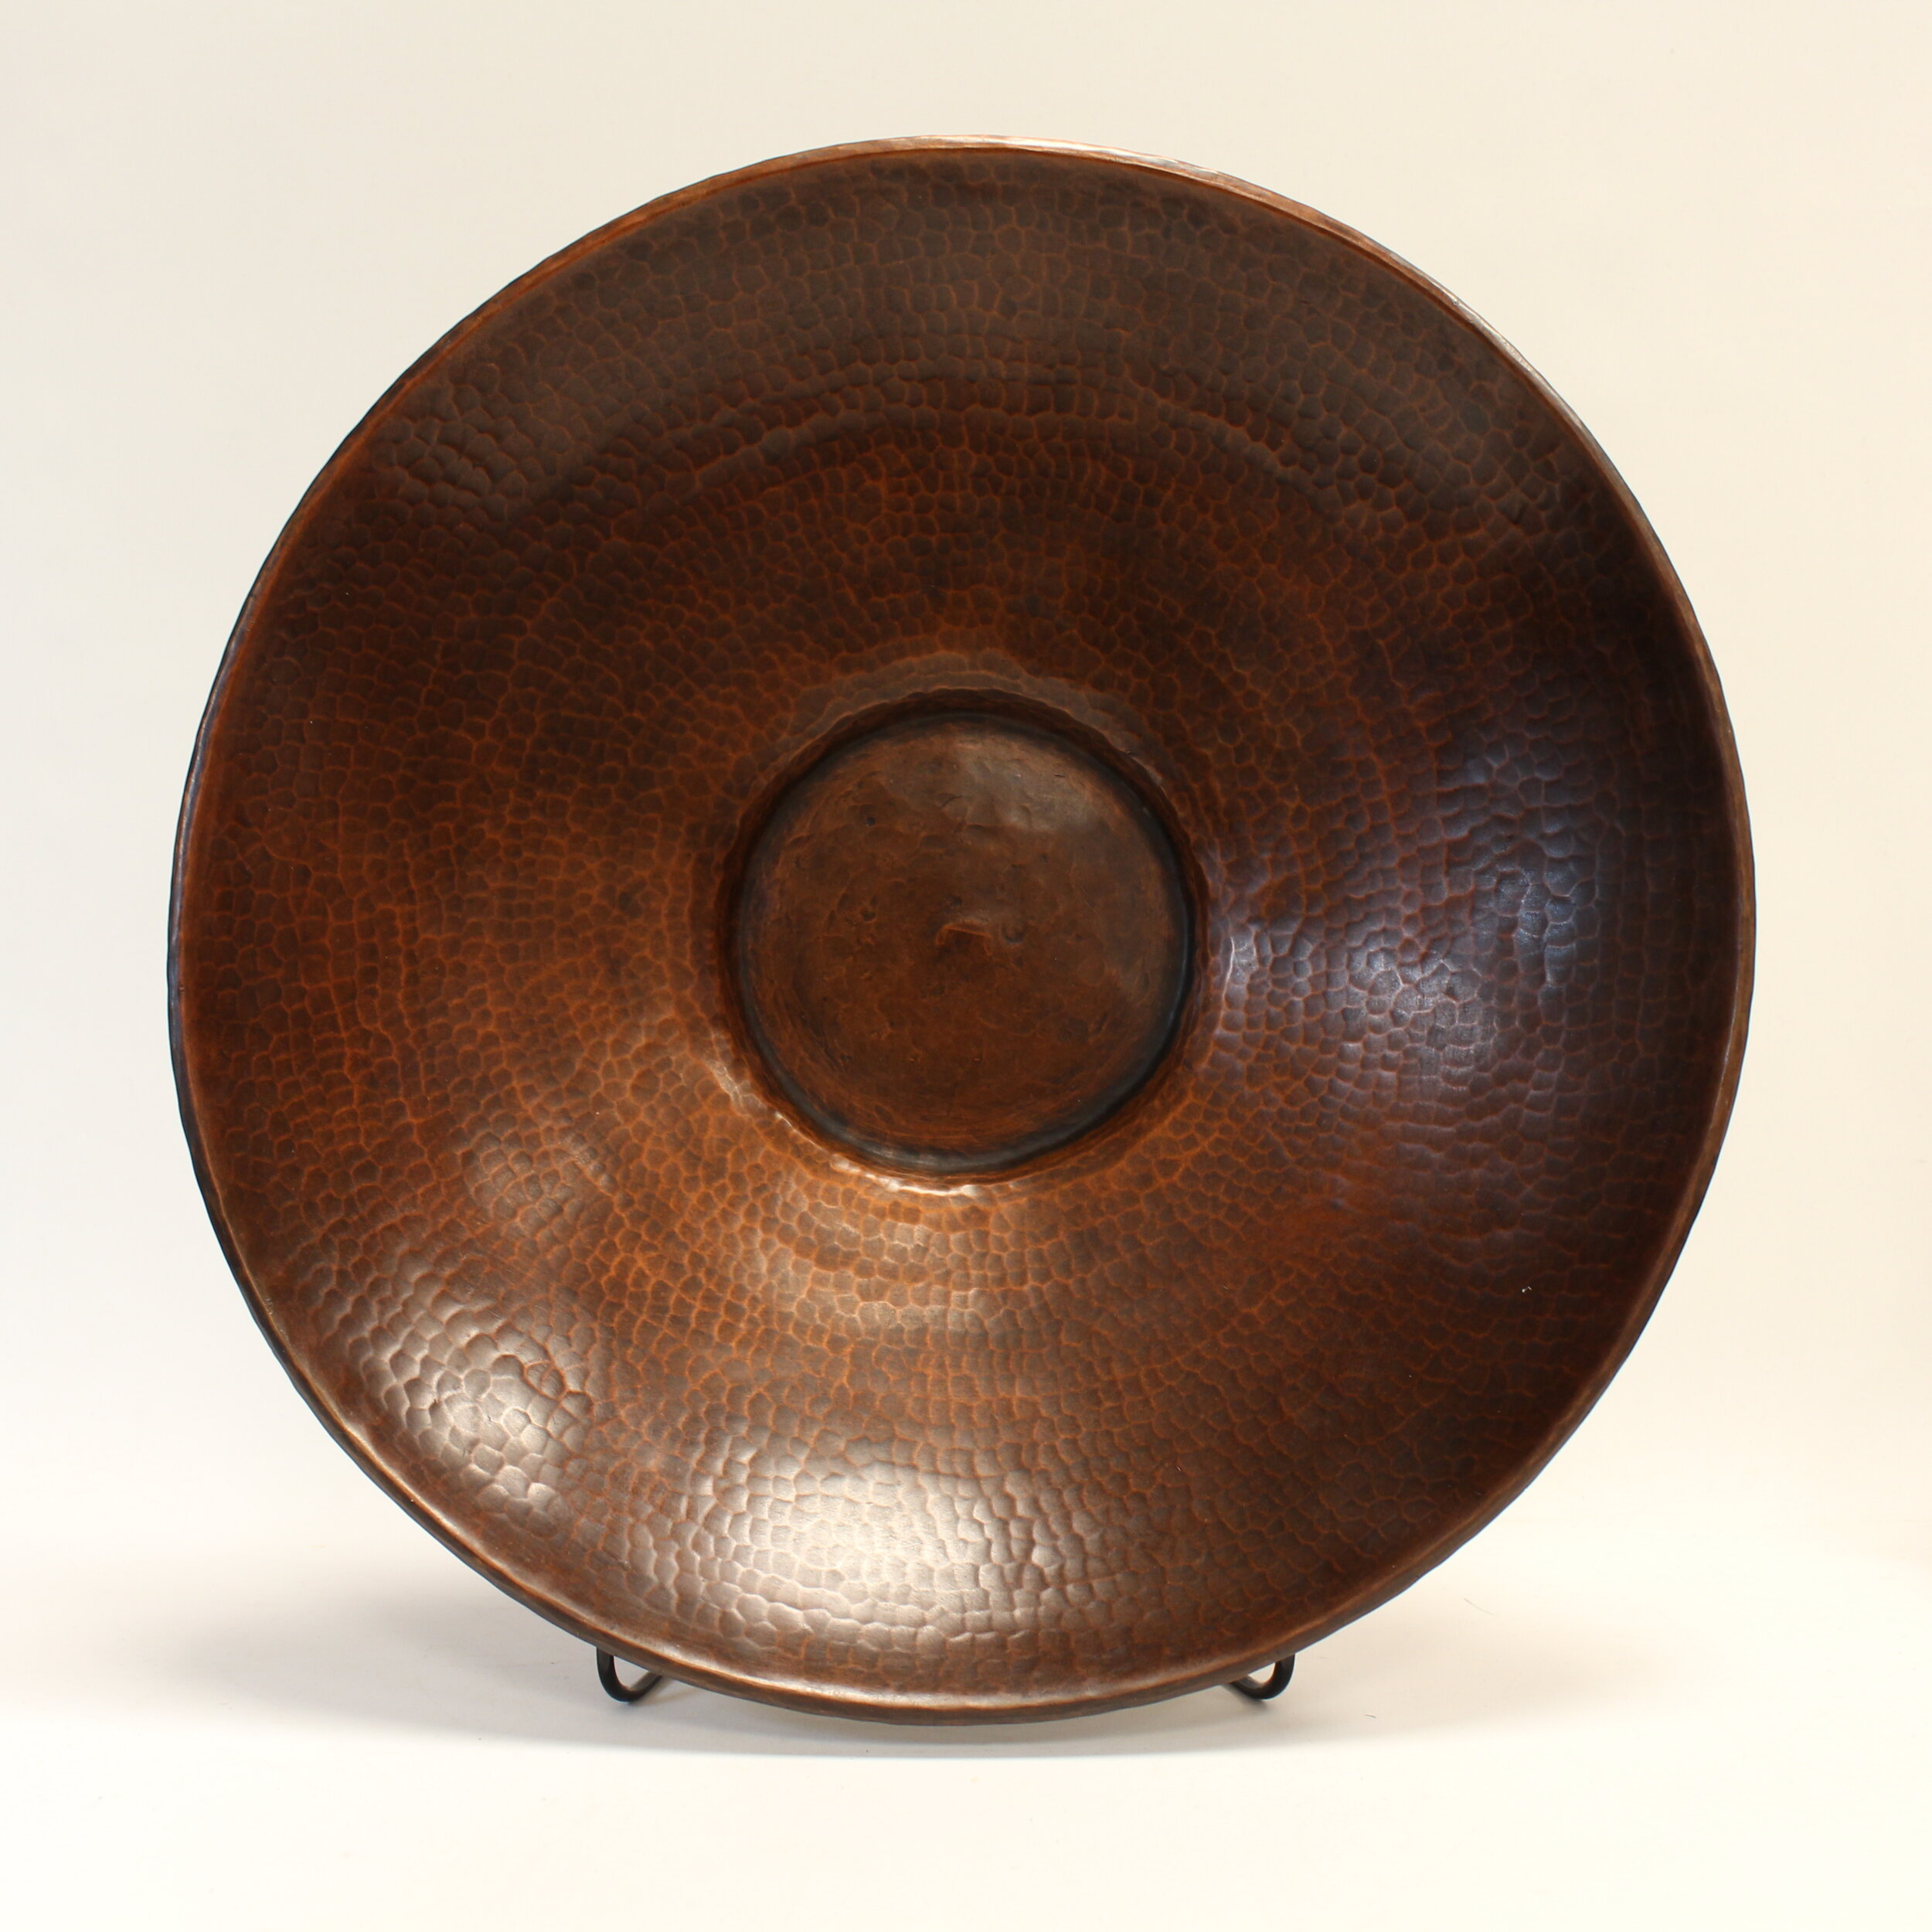 SOLD, Tully Fruit Bowl